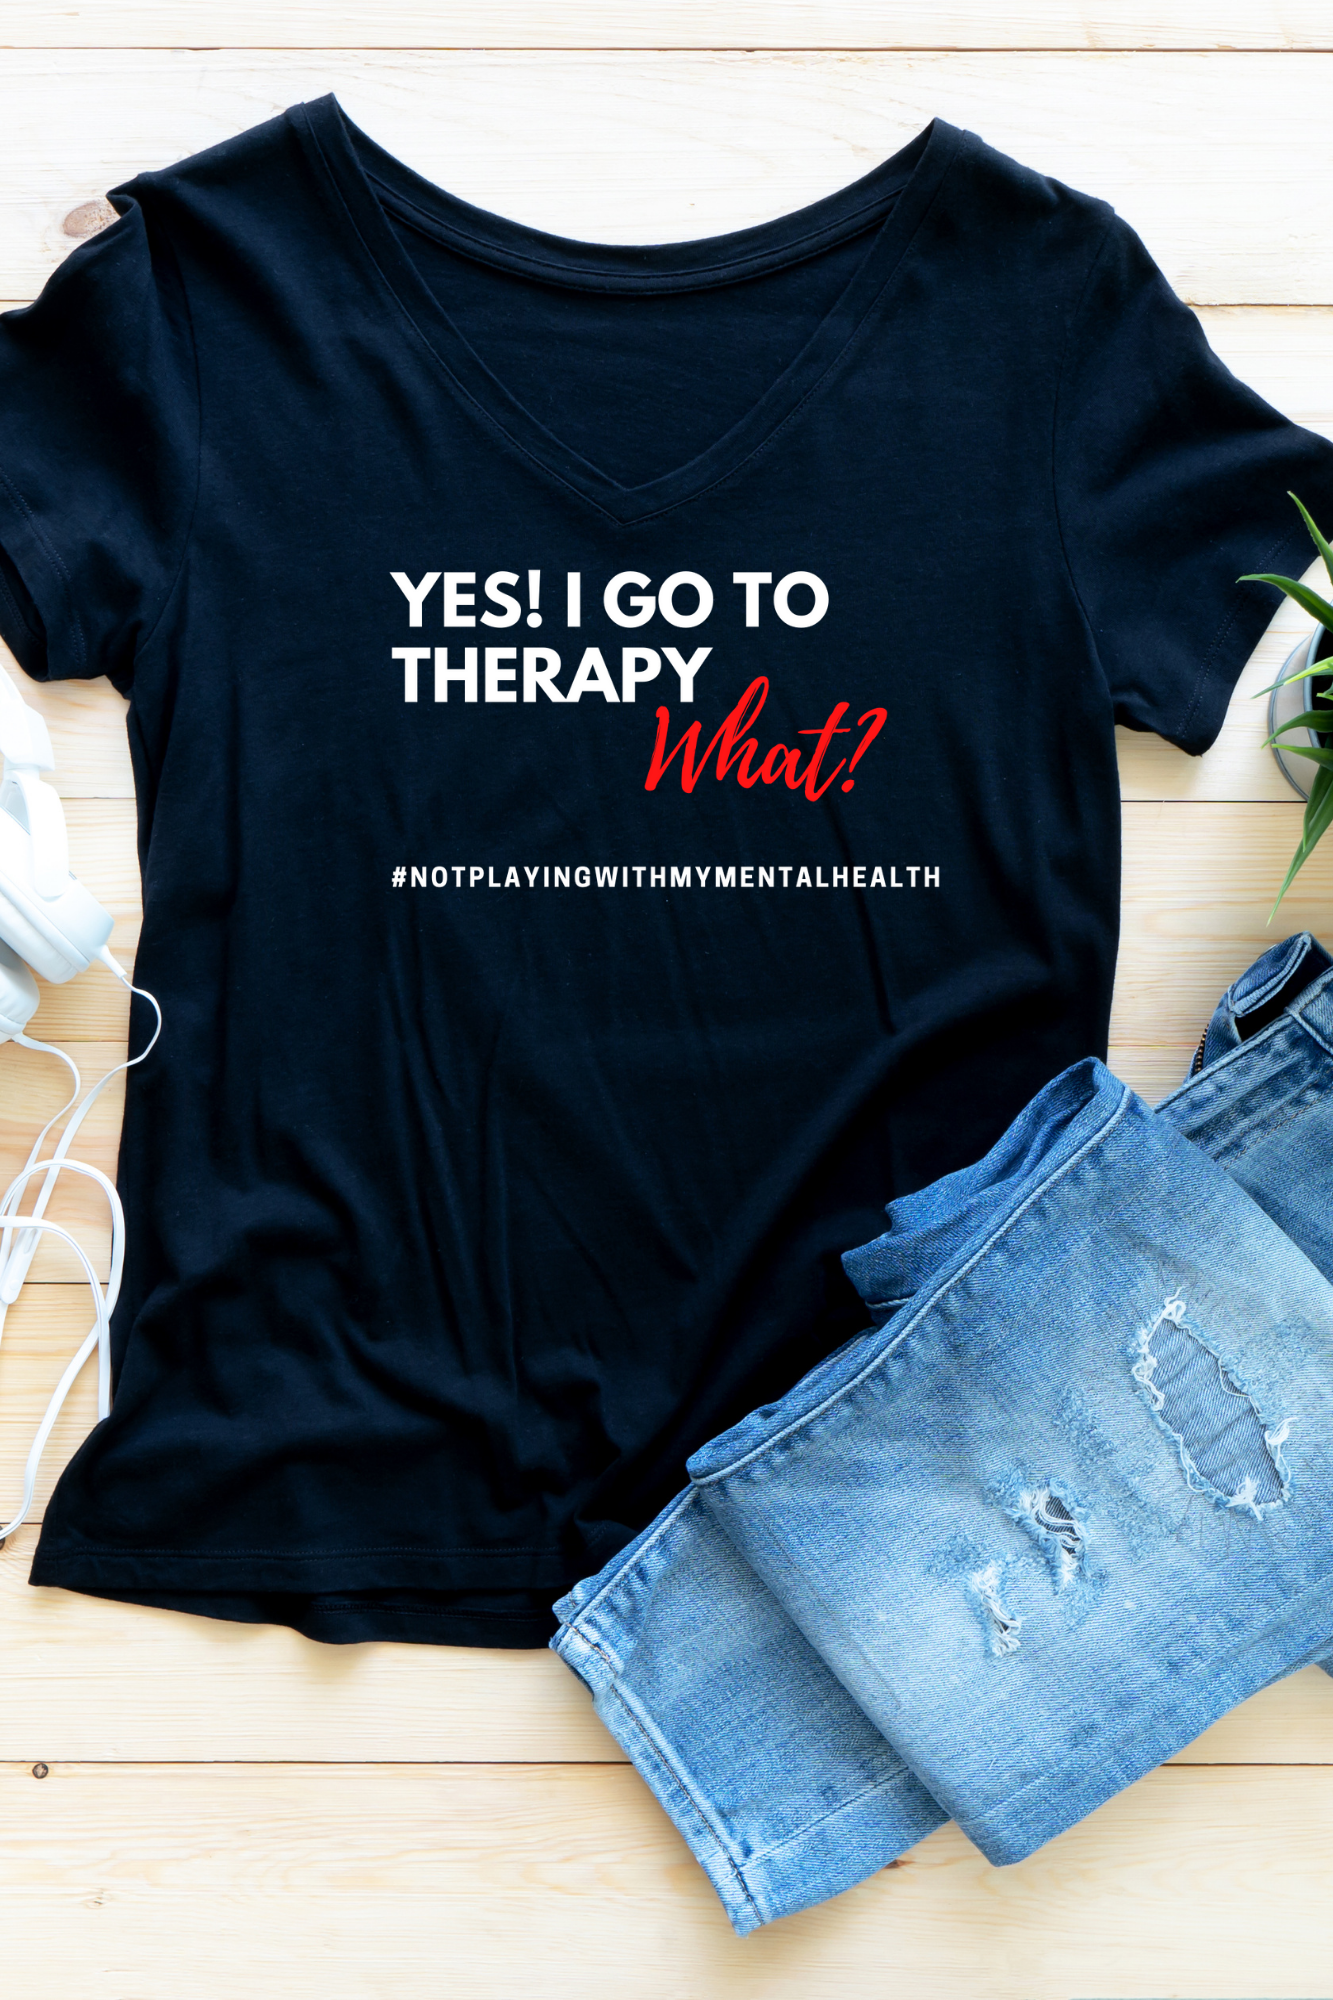 Yes I go to therapy. What? T-shirts